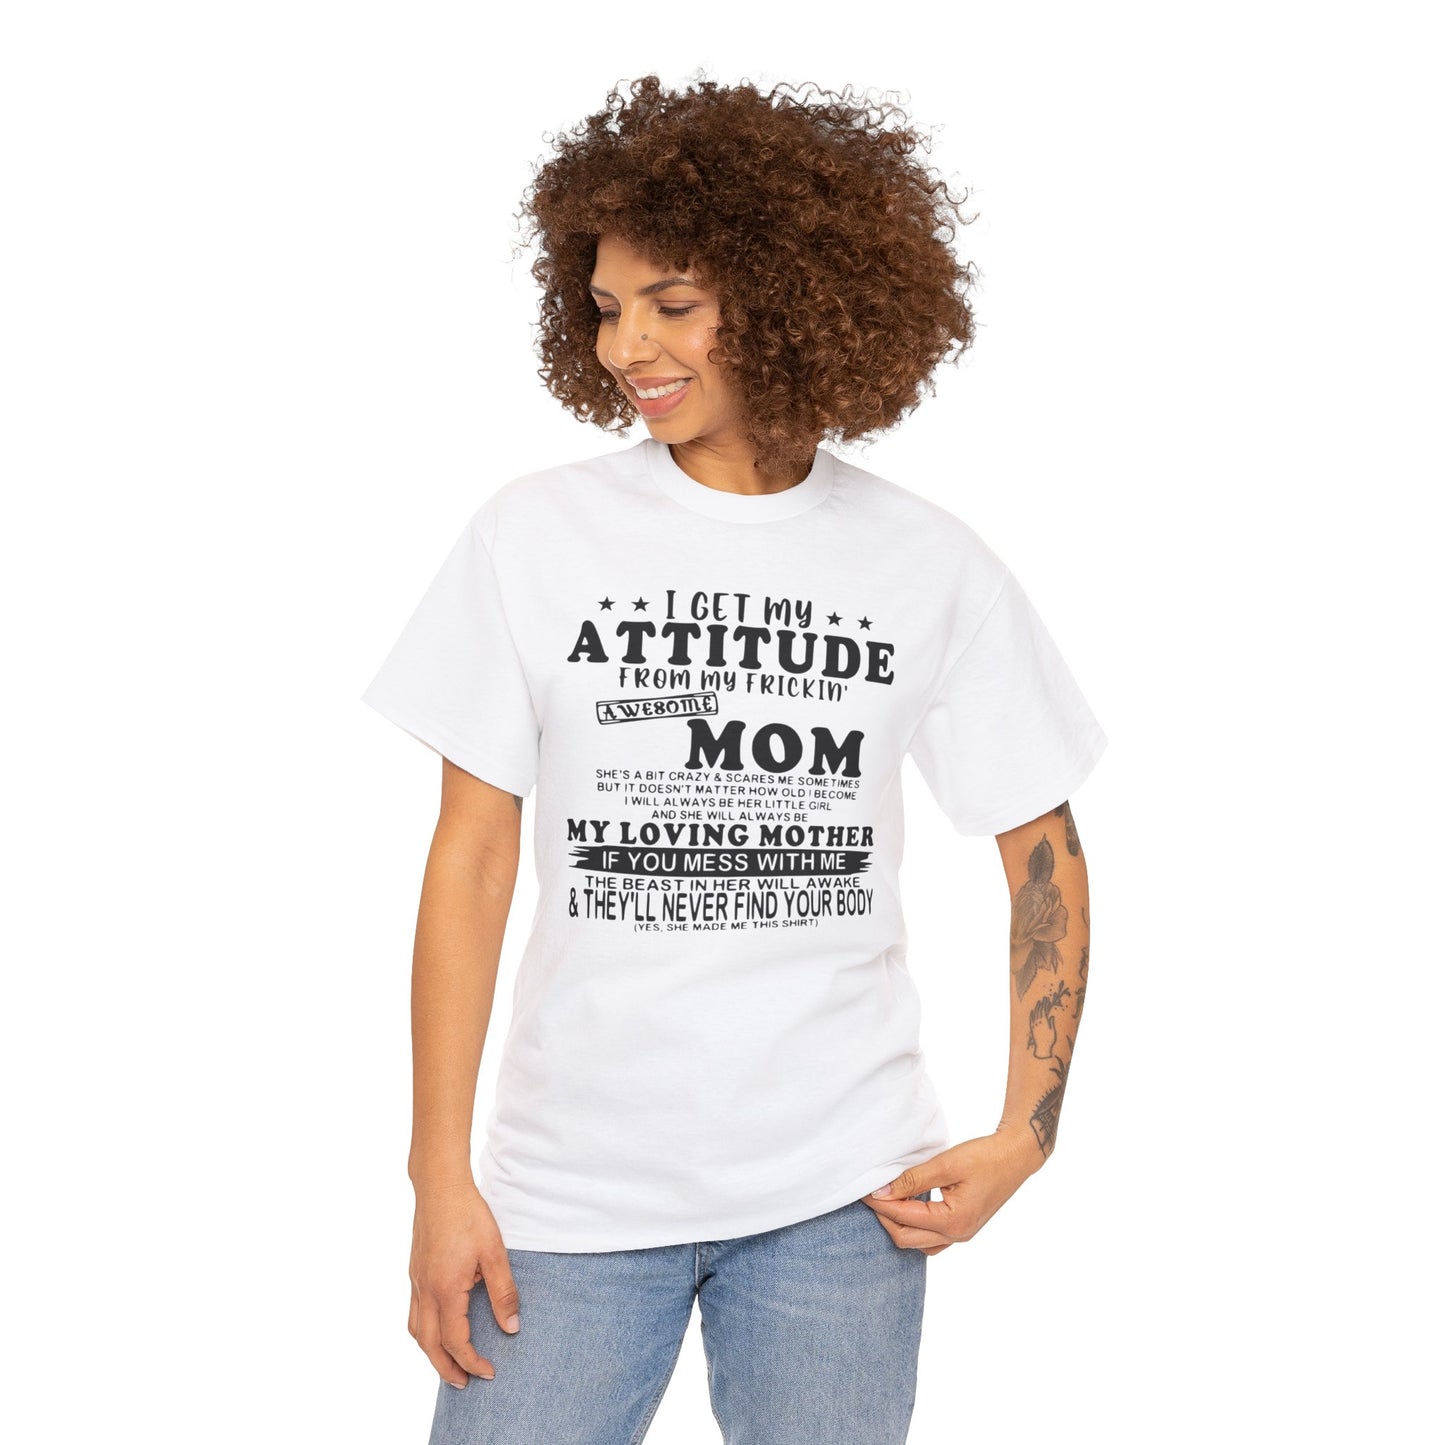 "My Frickin Awesome Mom" heavy cotton unisex t-shirt with a bold humor-filled message.